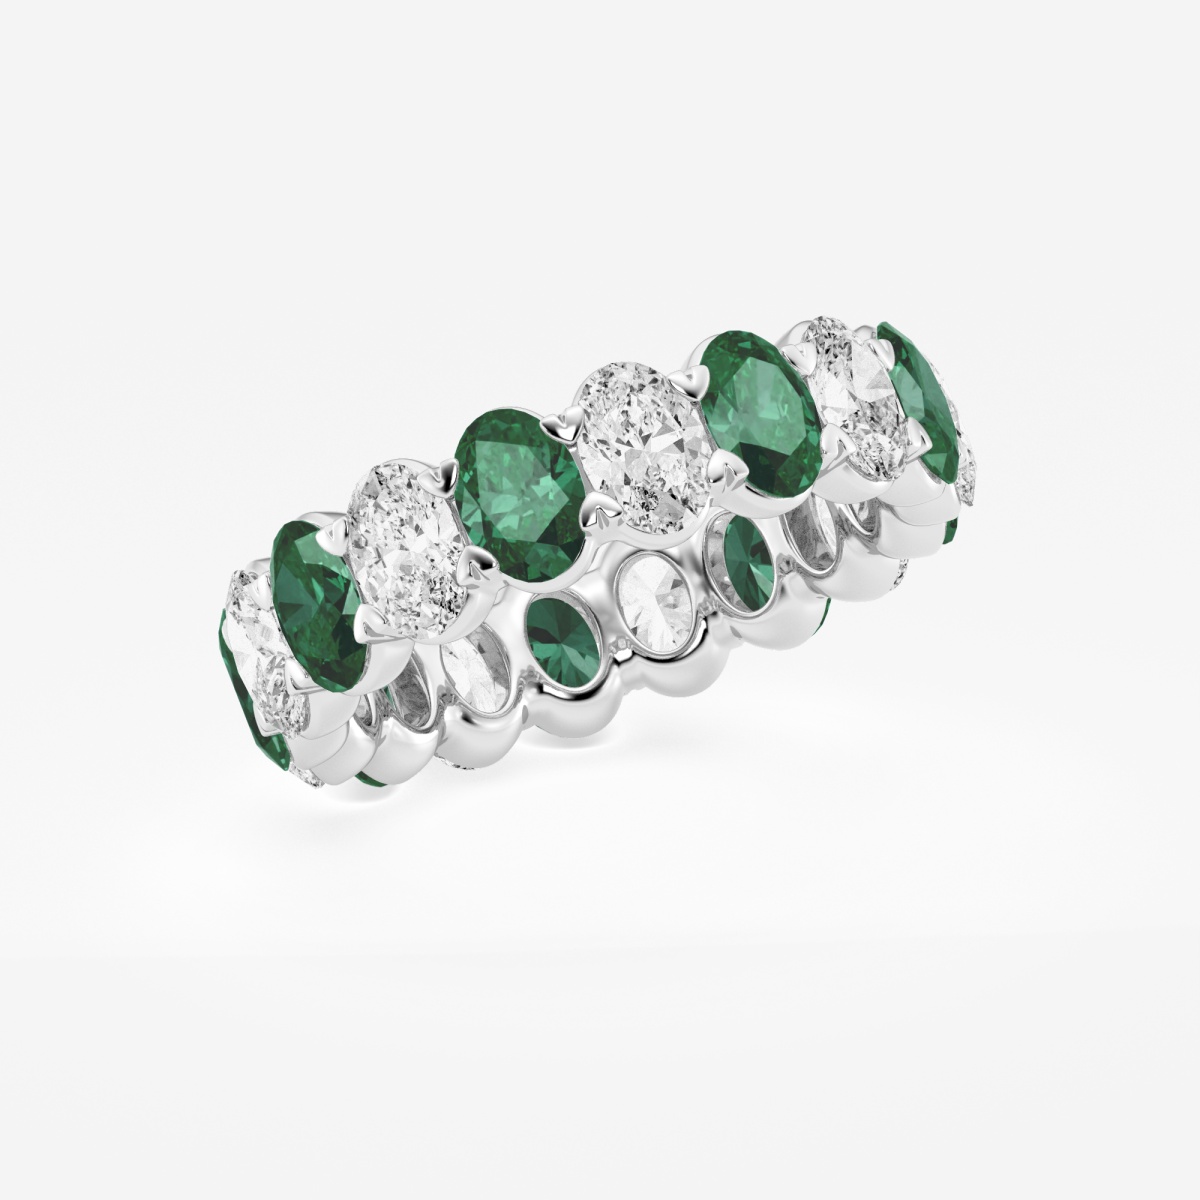 Additional Image 1 for  5.4x3.8 mm Oval Cut Created Emerald and 2 5/8 ctw Oval Lab Grown Diamond Eternity Band - 5.5mm Width